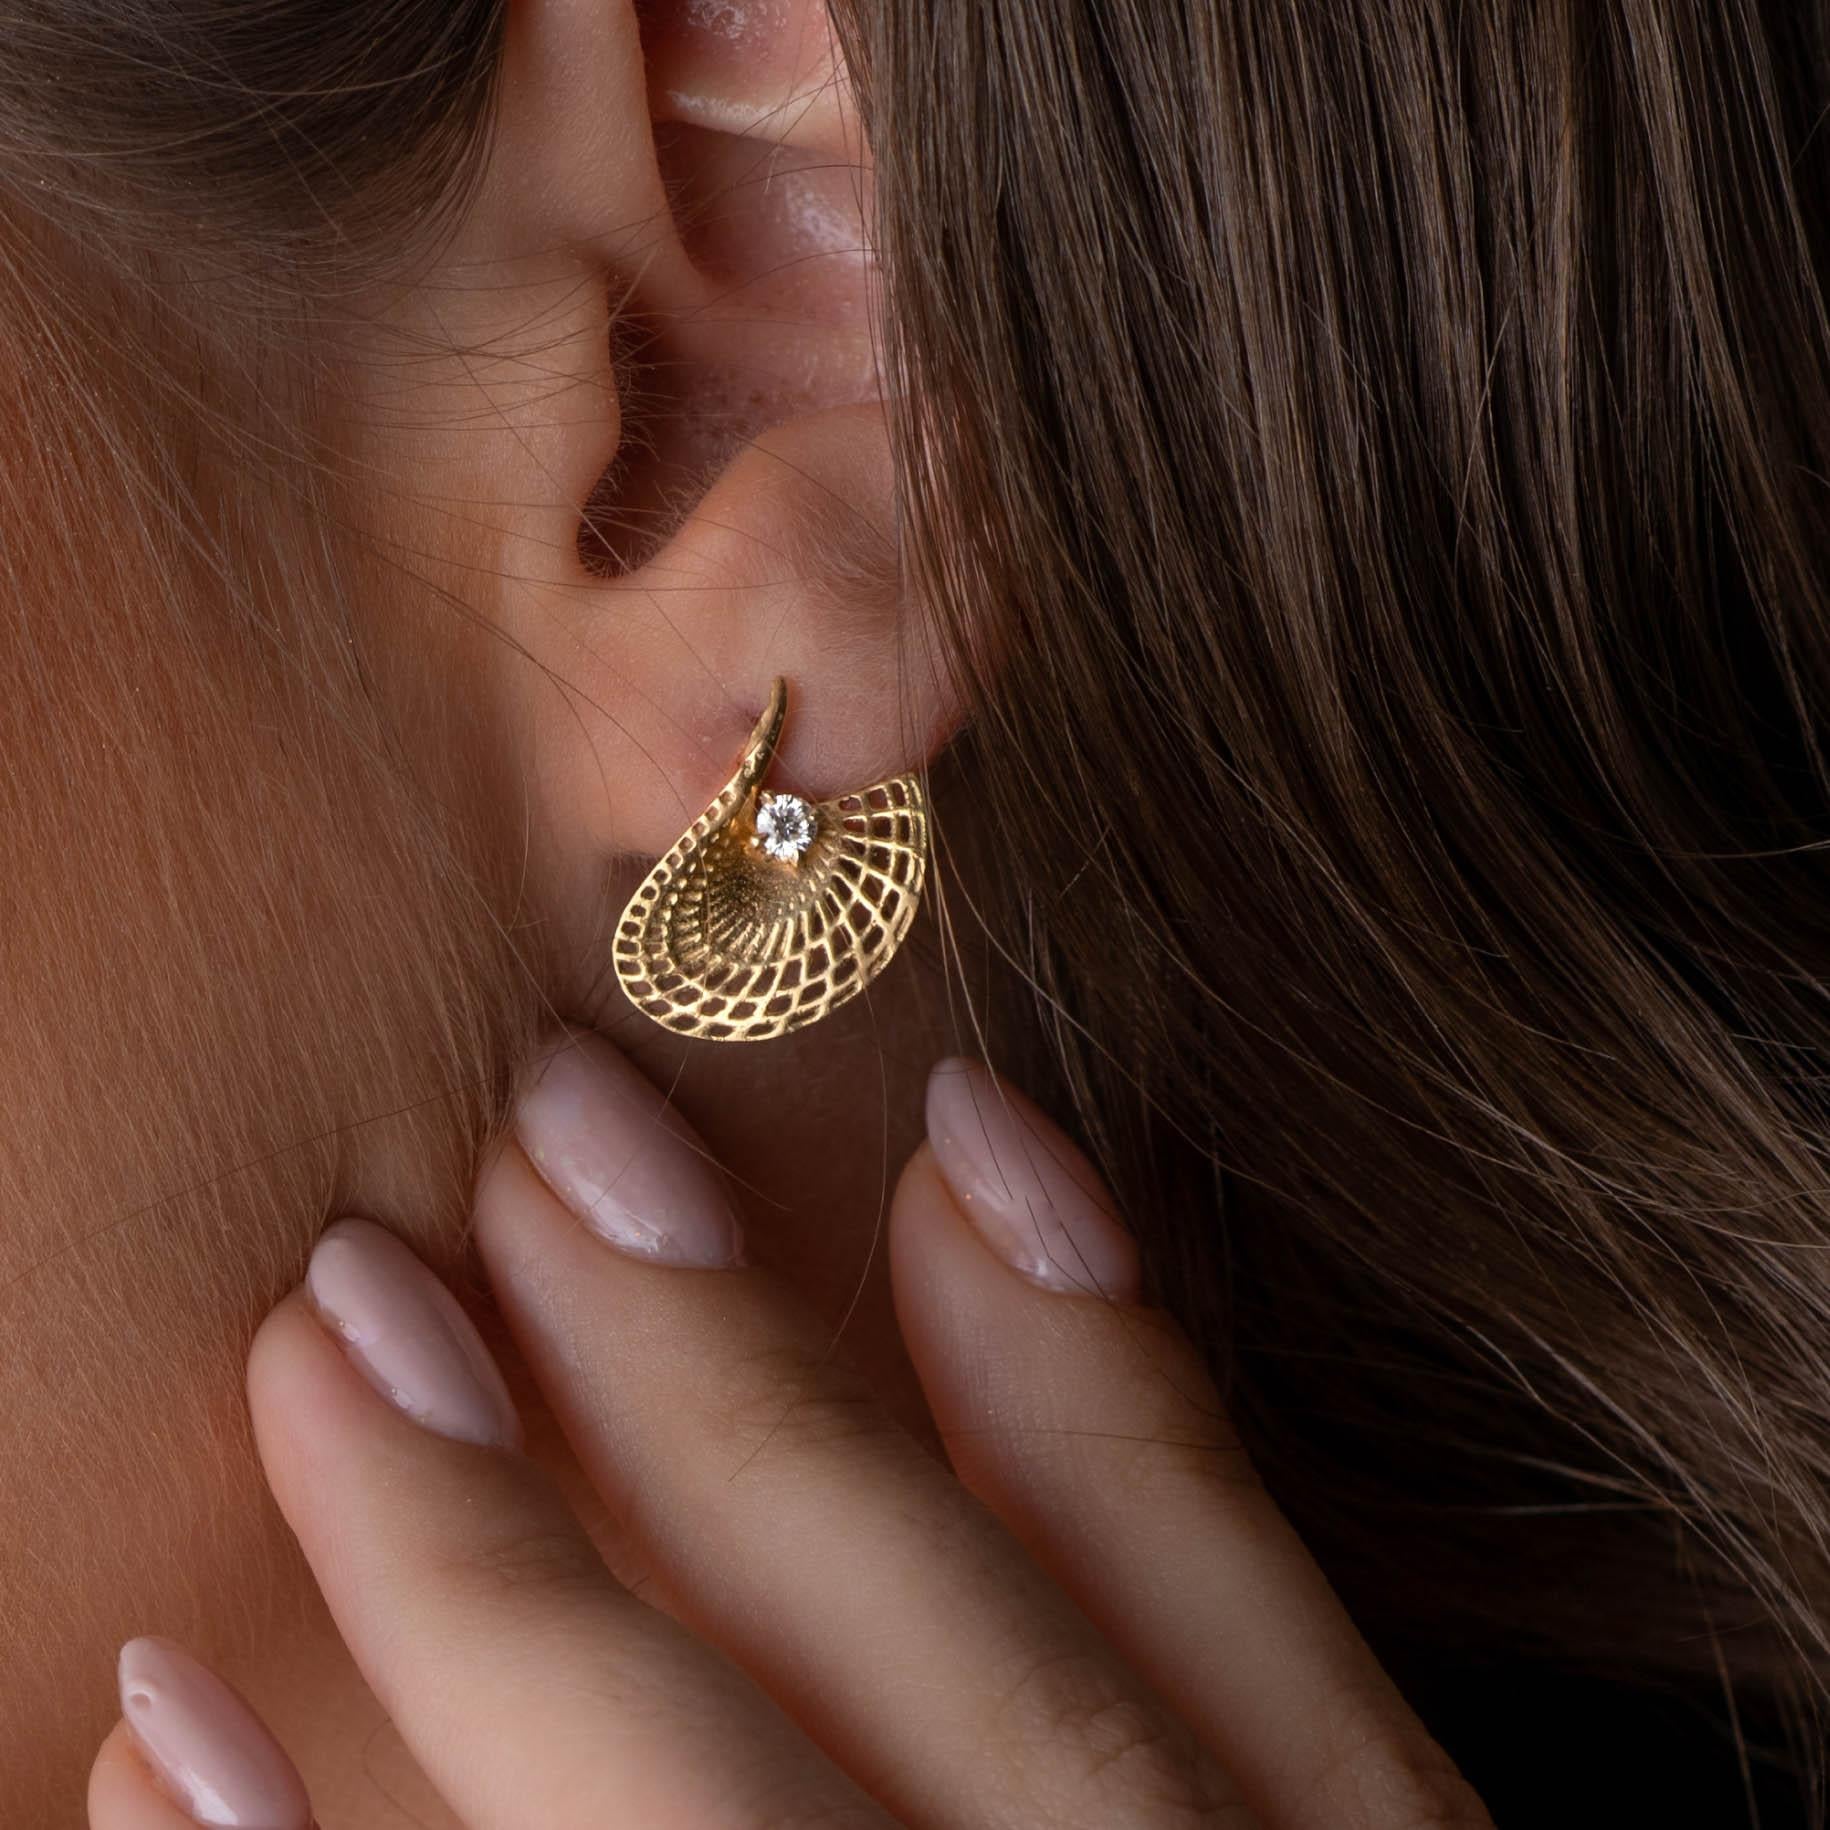 Small Twisted Disk, Stud Earrings with diamonds - 14k
Amorphous Twisted Disk Earrings. 
Those magnificent gold elongated stud earrings combine a classic look with a twist. It's made with 3D printing technique in 18k solid gold to create the fine